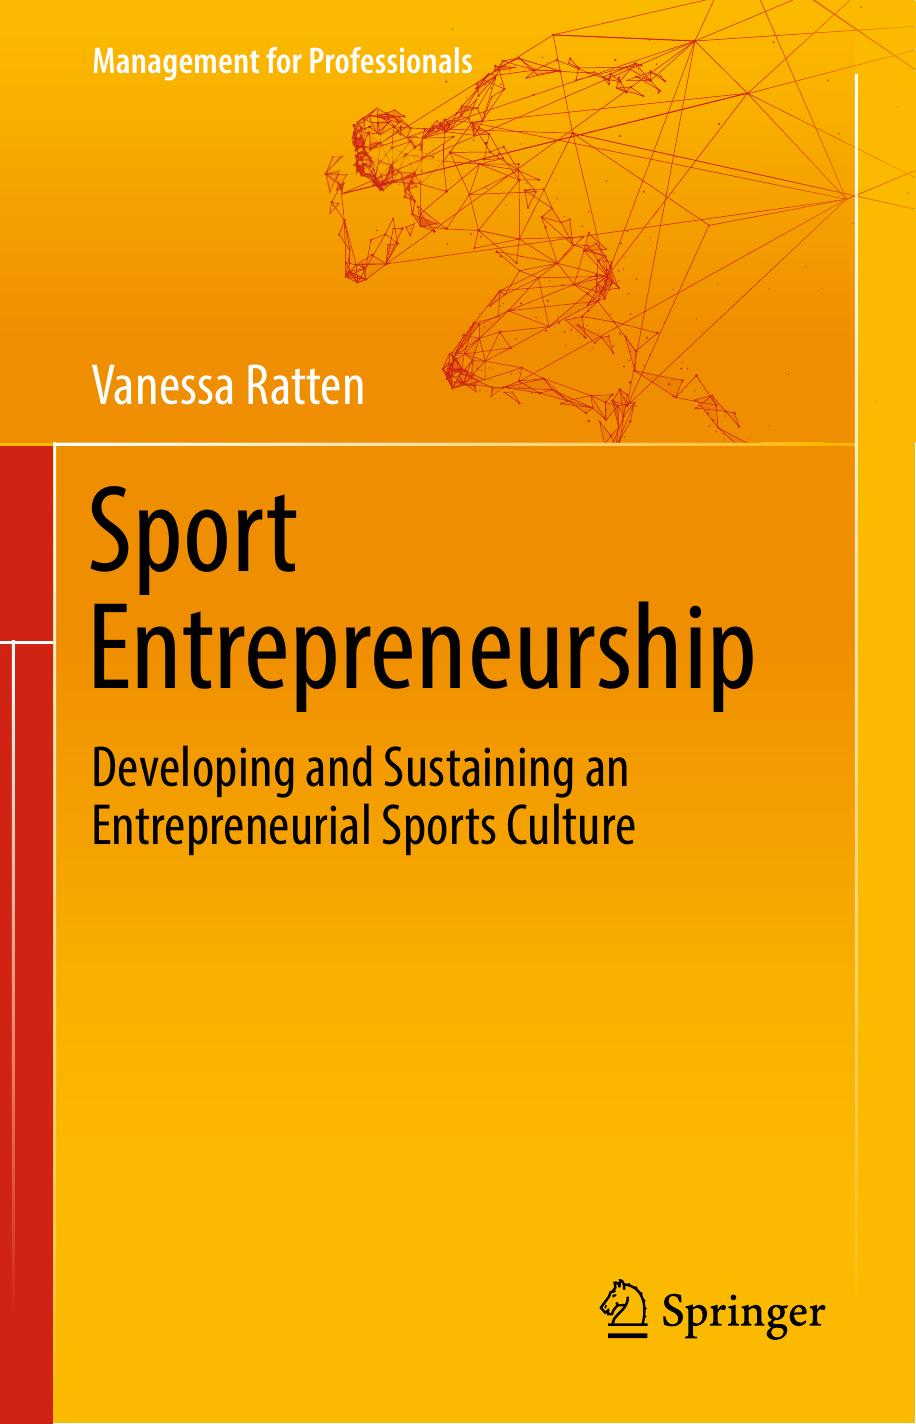 Sport Entrepreneurship  Developing and Sustaining an Entrepreneurial Sports Culture ( PDFDrive ) 2018